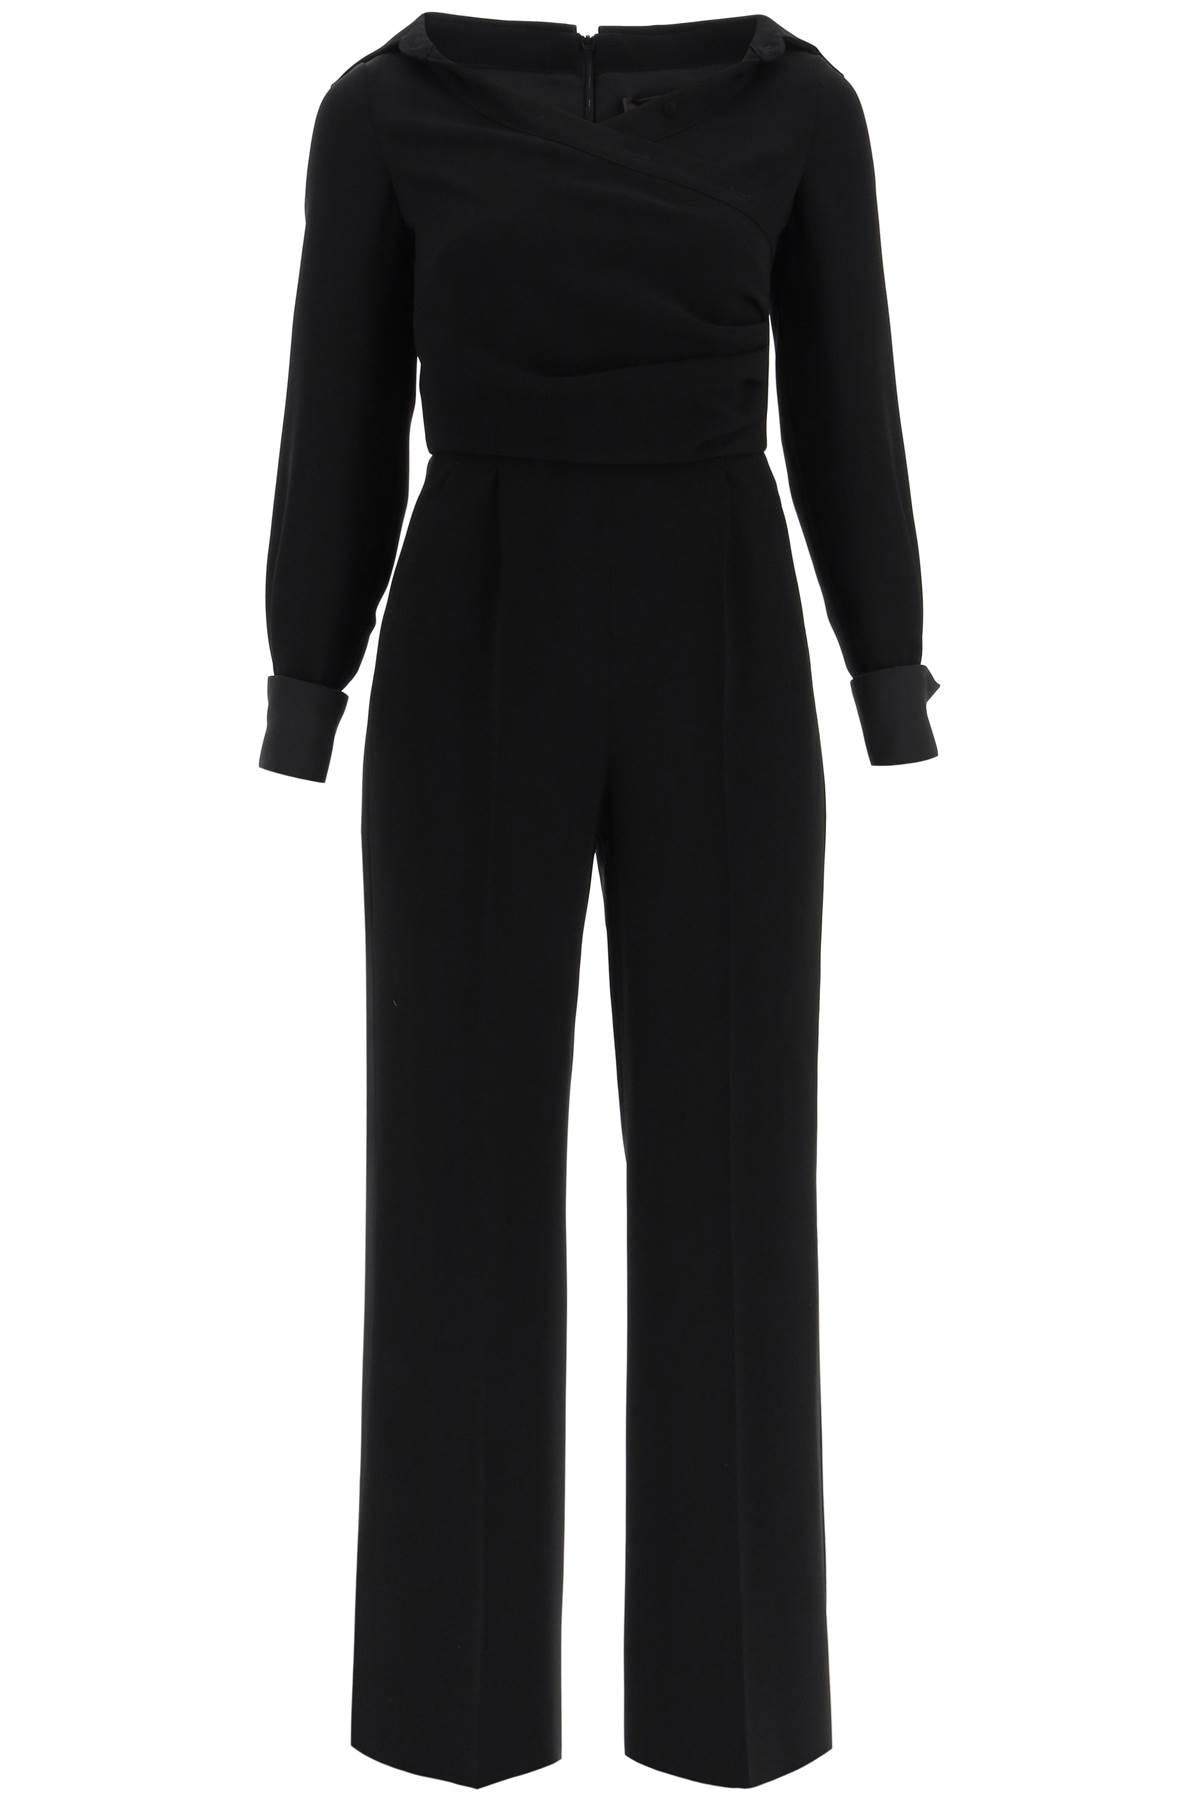 Max Mara Synthetic Cady Jumpsuit in Black - Save 1% | Lyst